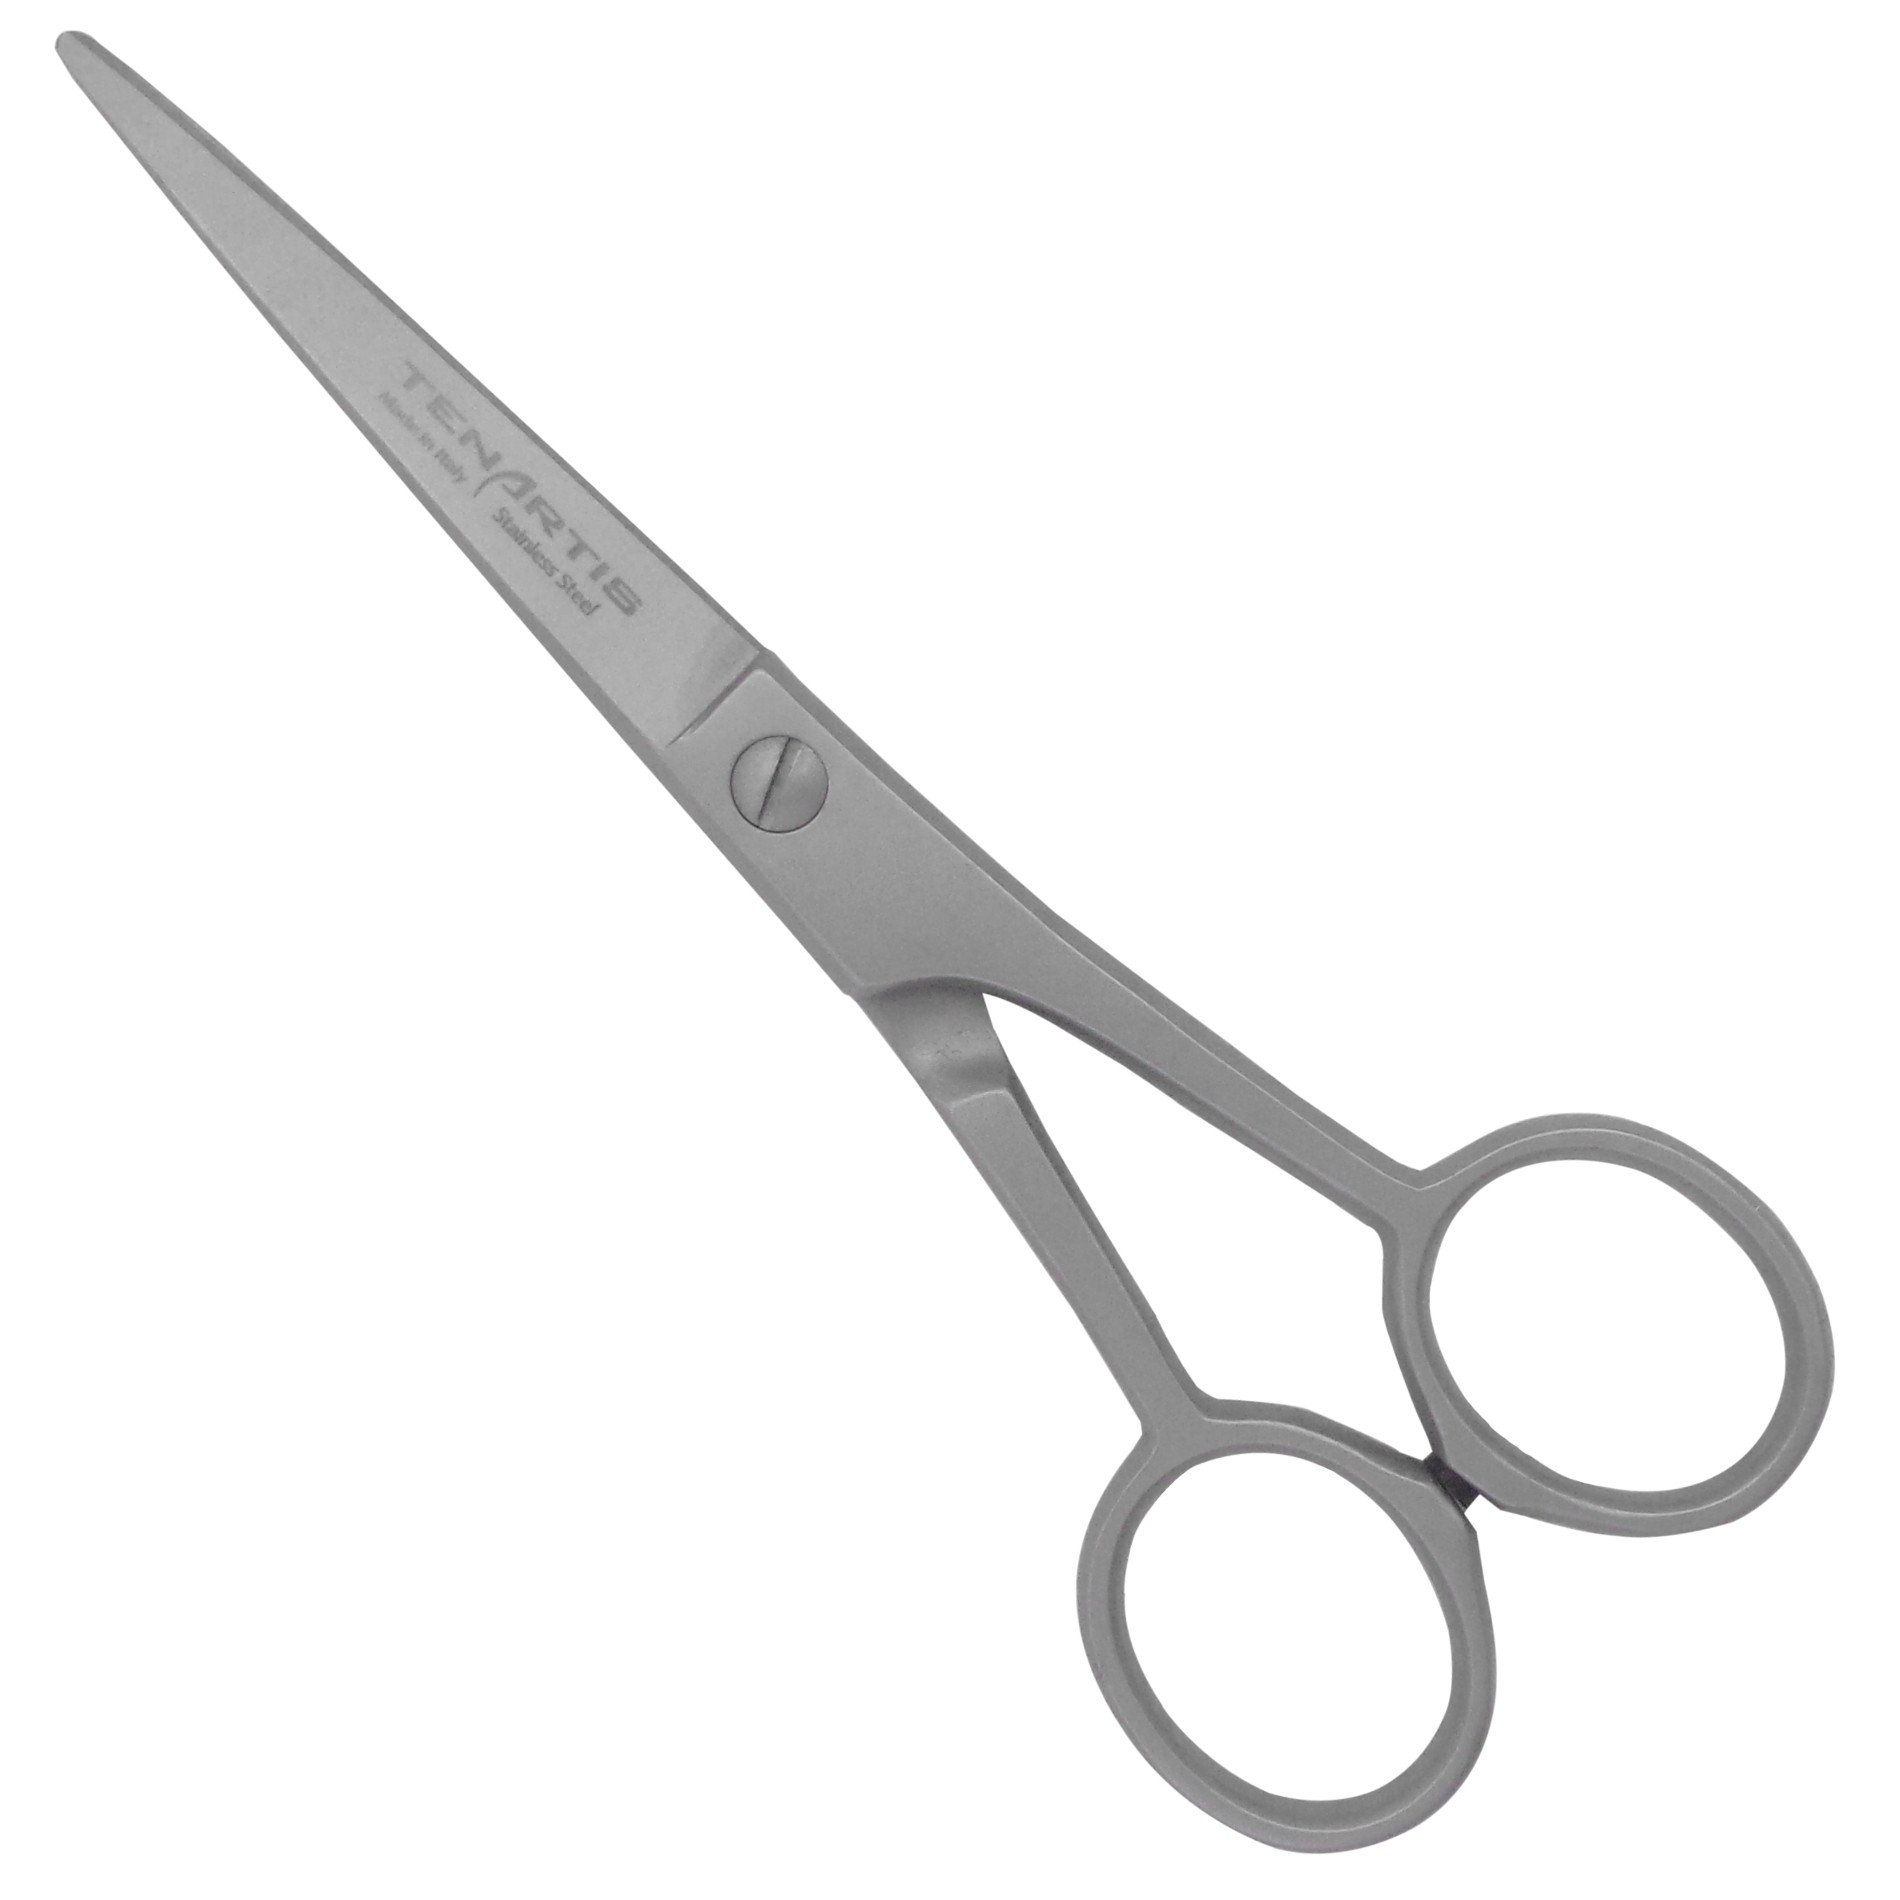  3 Swords Germany - brand quality STAINLESS STEEL INOX CURVED  CUTICLE SCISSORS - STRONG SCISSORS FOR STRONG PEOPLE with case by 3 Swords  Germany : Everything Else